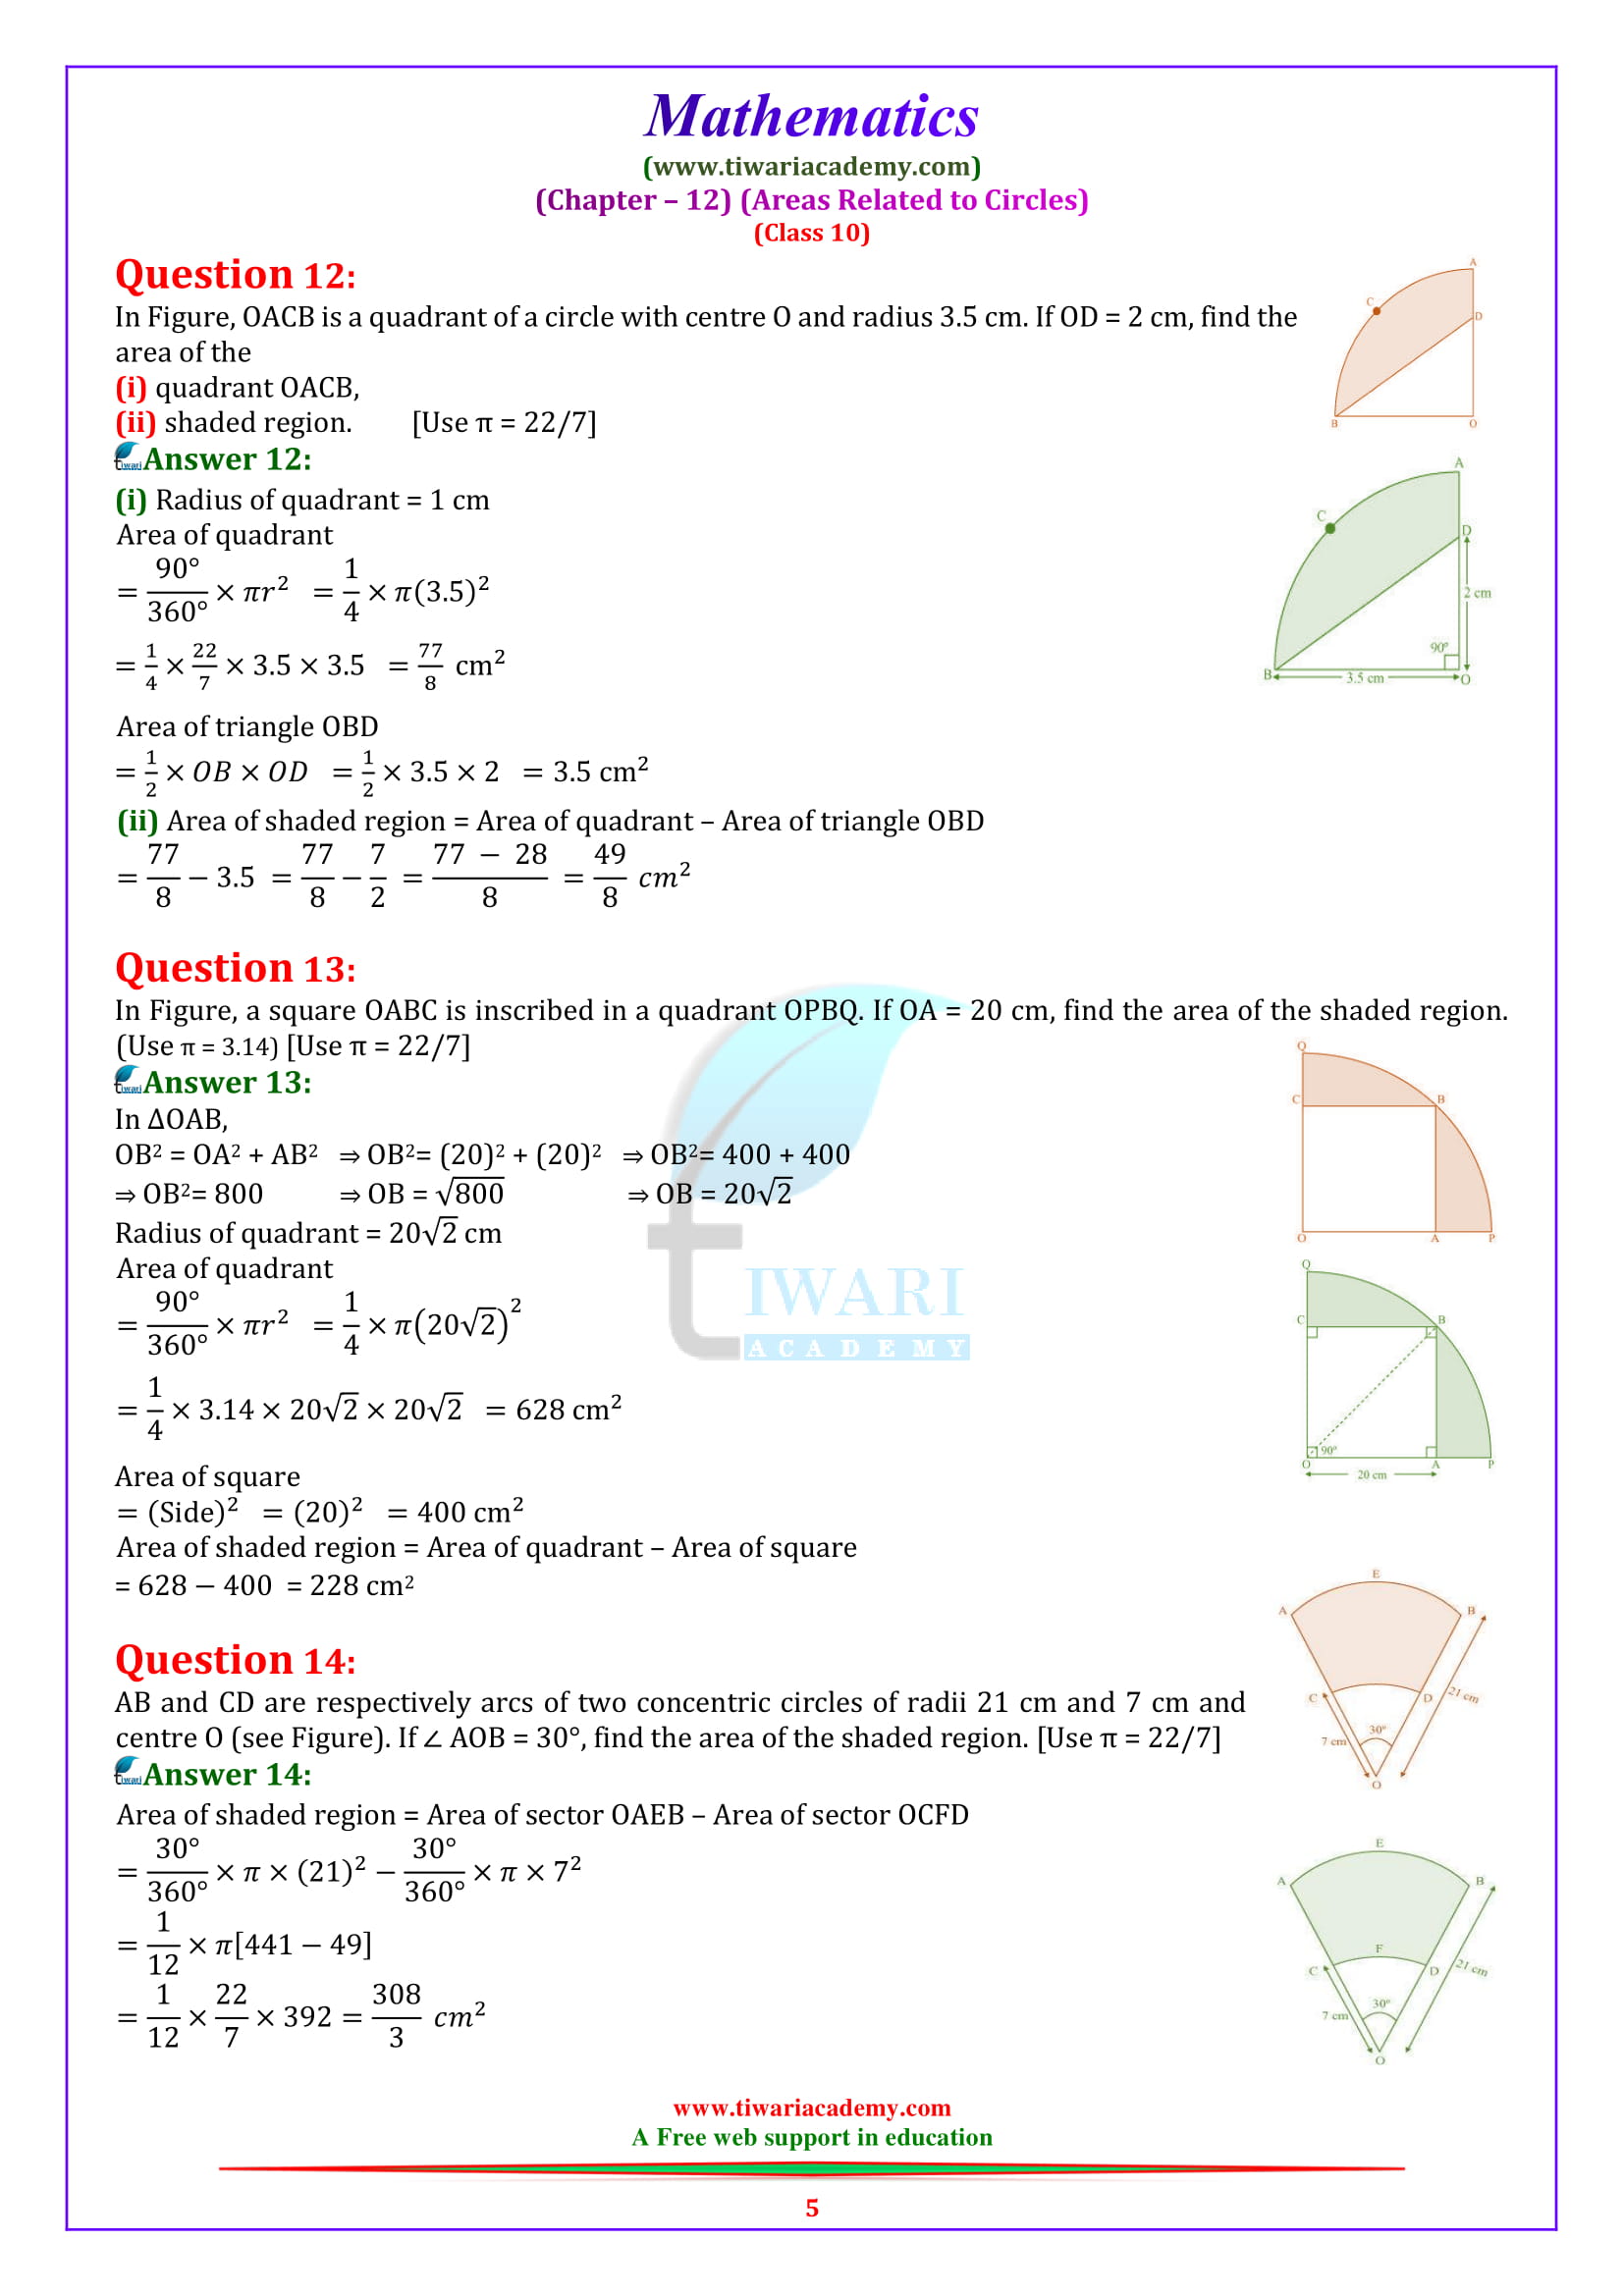 Class 10 Maths Chapter 12 Exercise 12.3 Areas Related to Circles question 1, 2, 3, 4, 5, 6, 7, 8, 9 solutions.